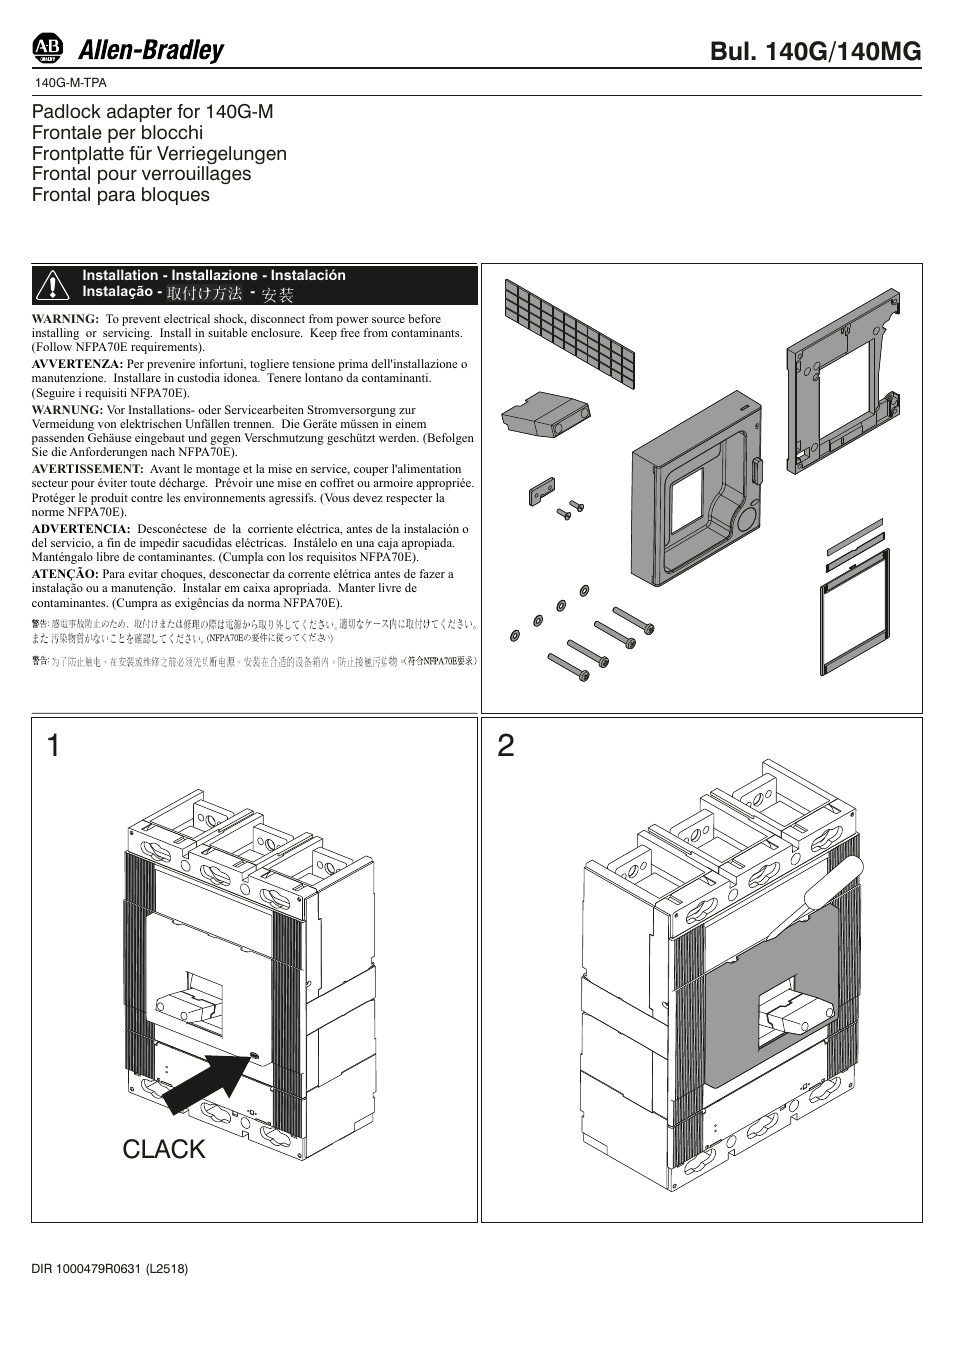 Rockwell Automation 140G-M-TPA M-Frame Padlock User Manual | 5 pages